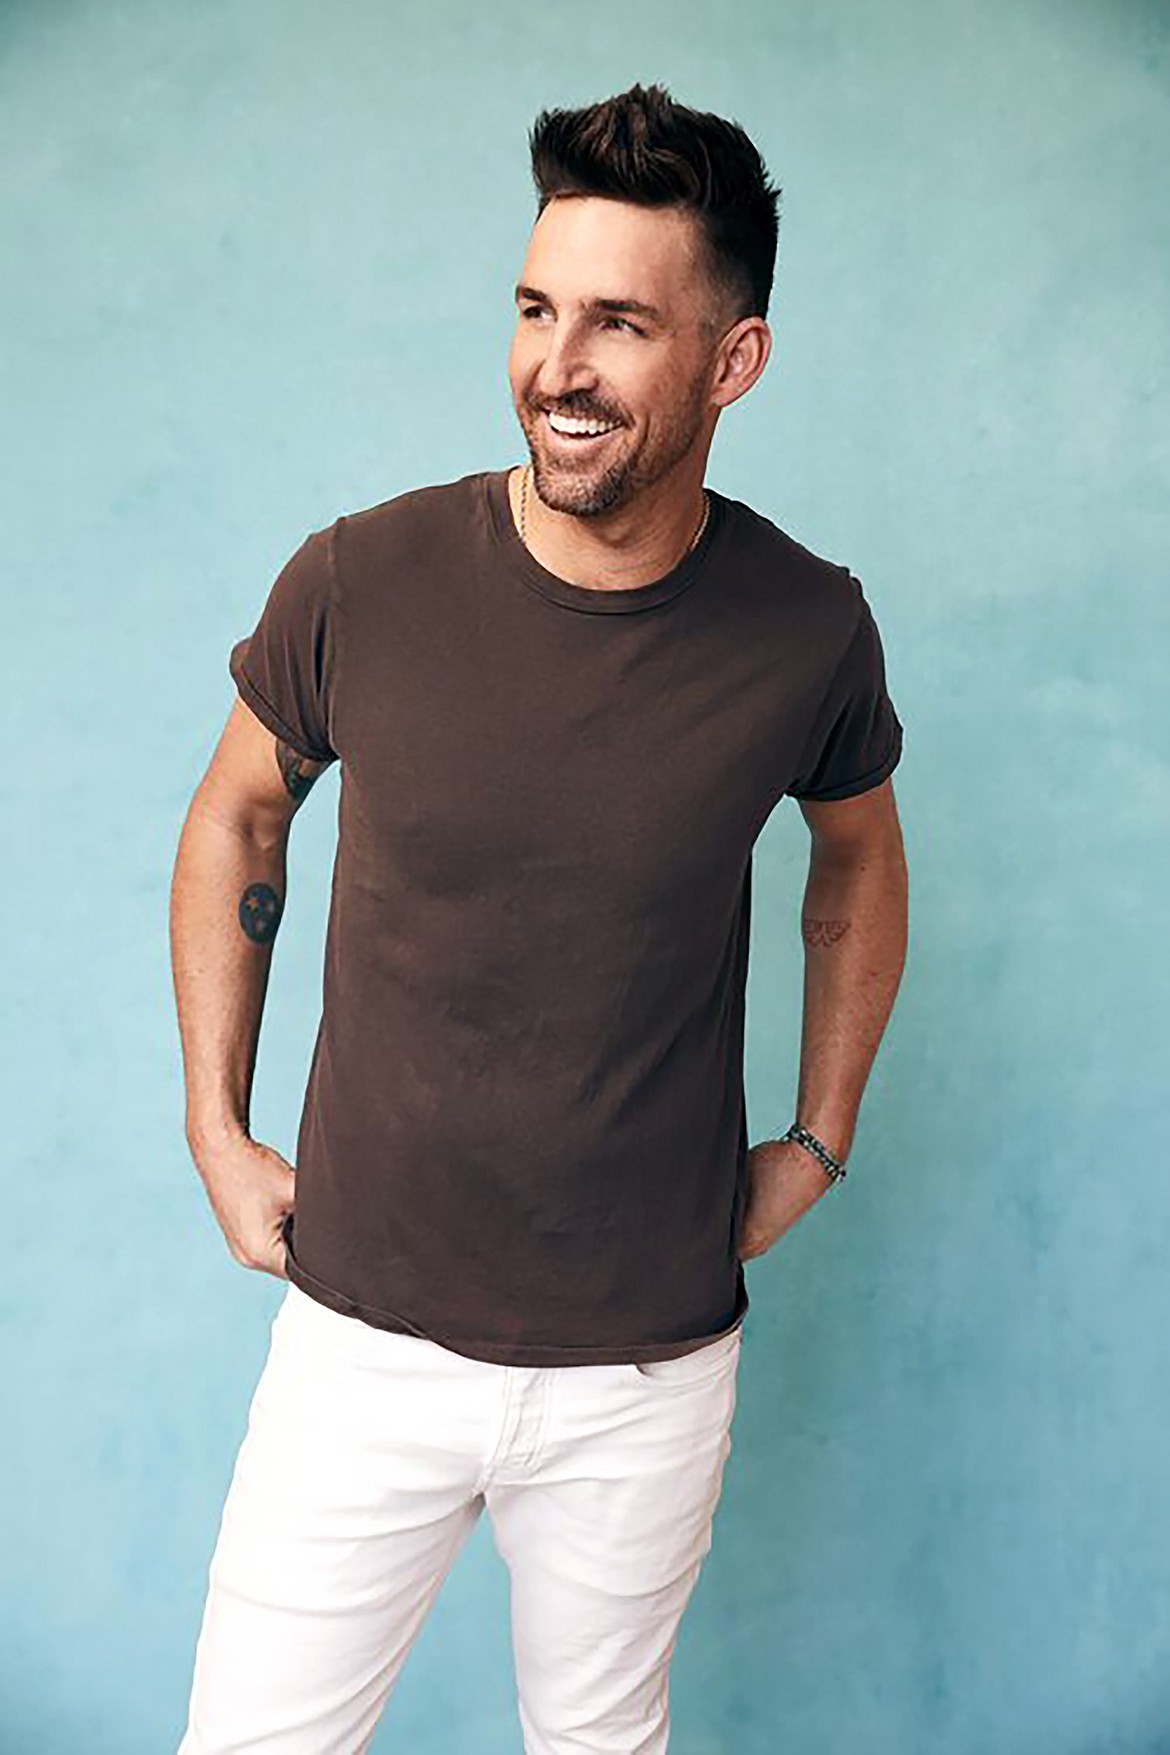 Jake Owen will perform at the Festival at Sandpoint on Friday, July 30.